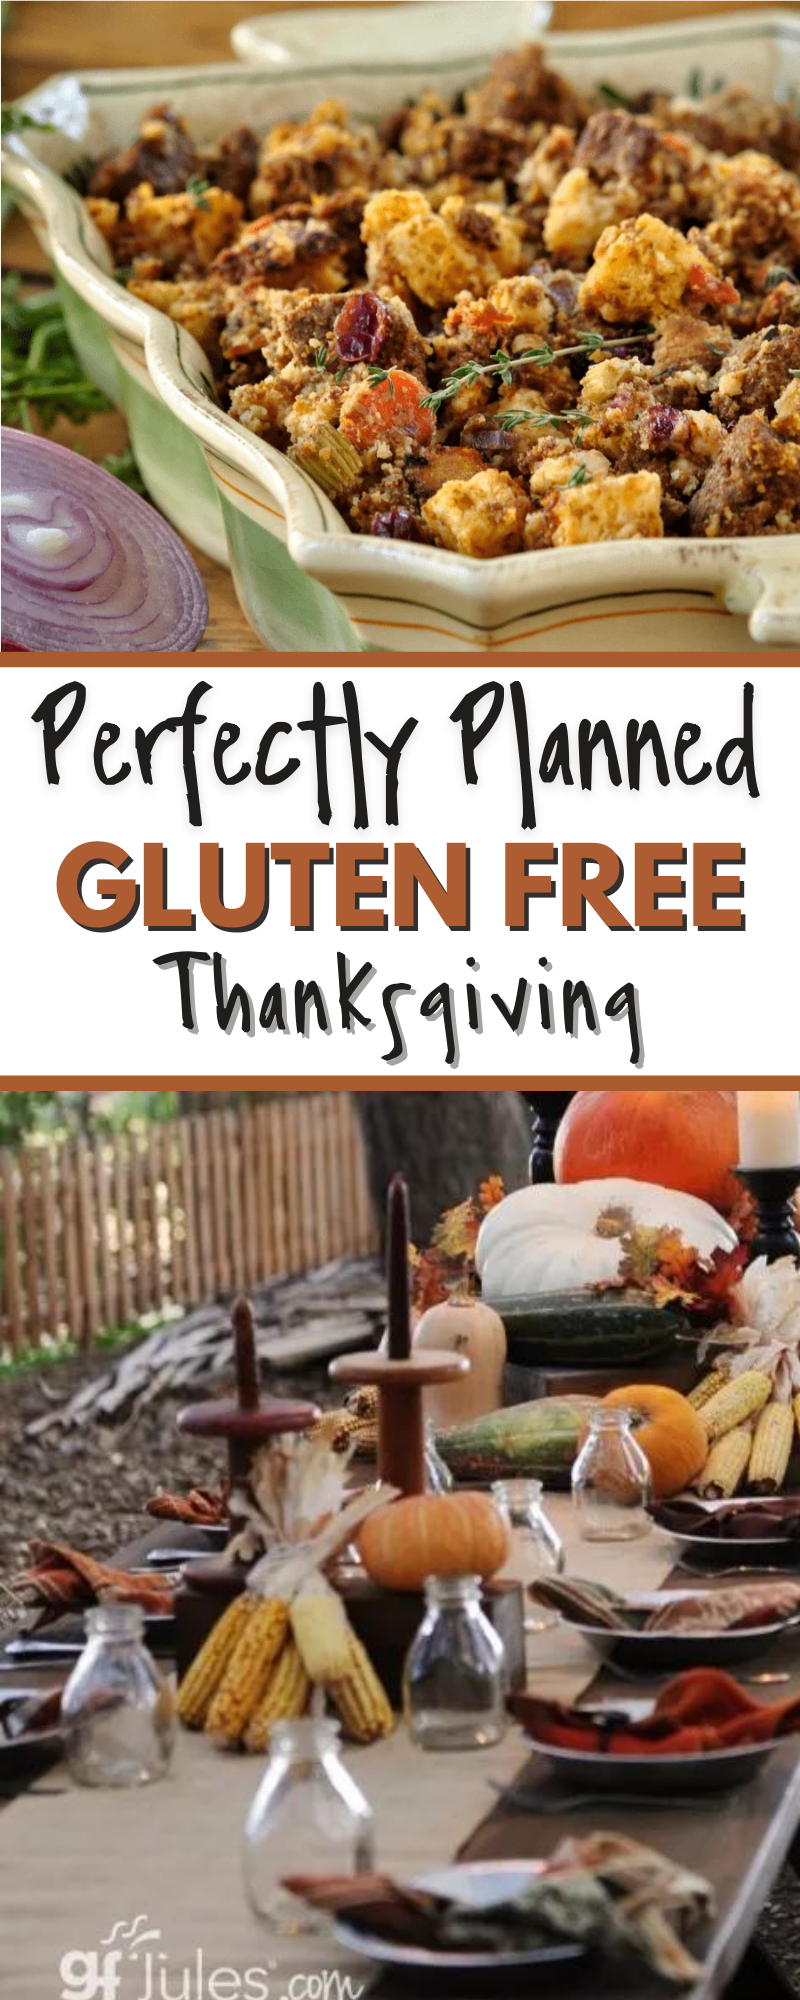 Perfectly Planned Gluten Free Thanksgiving